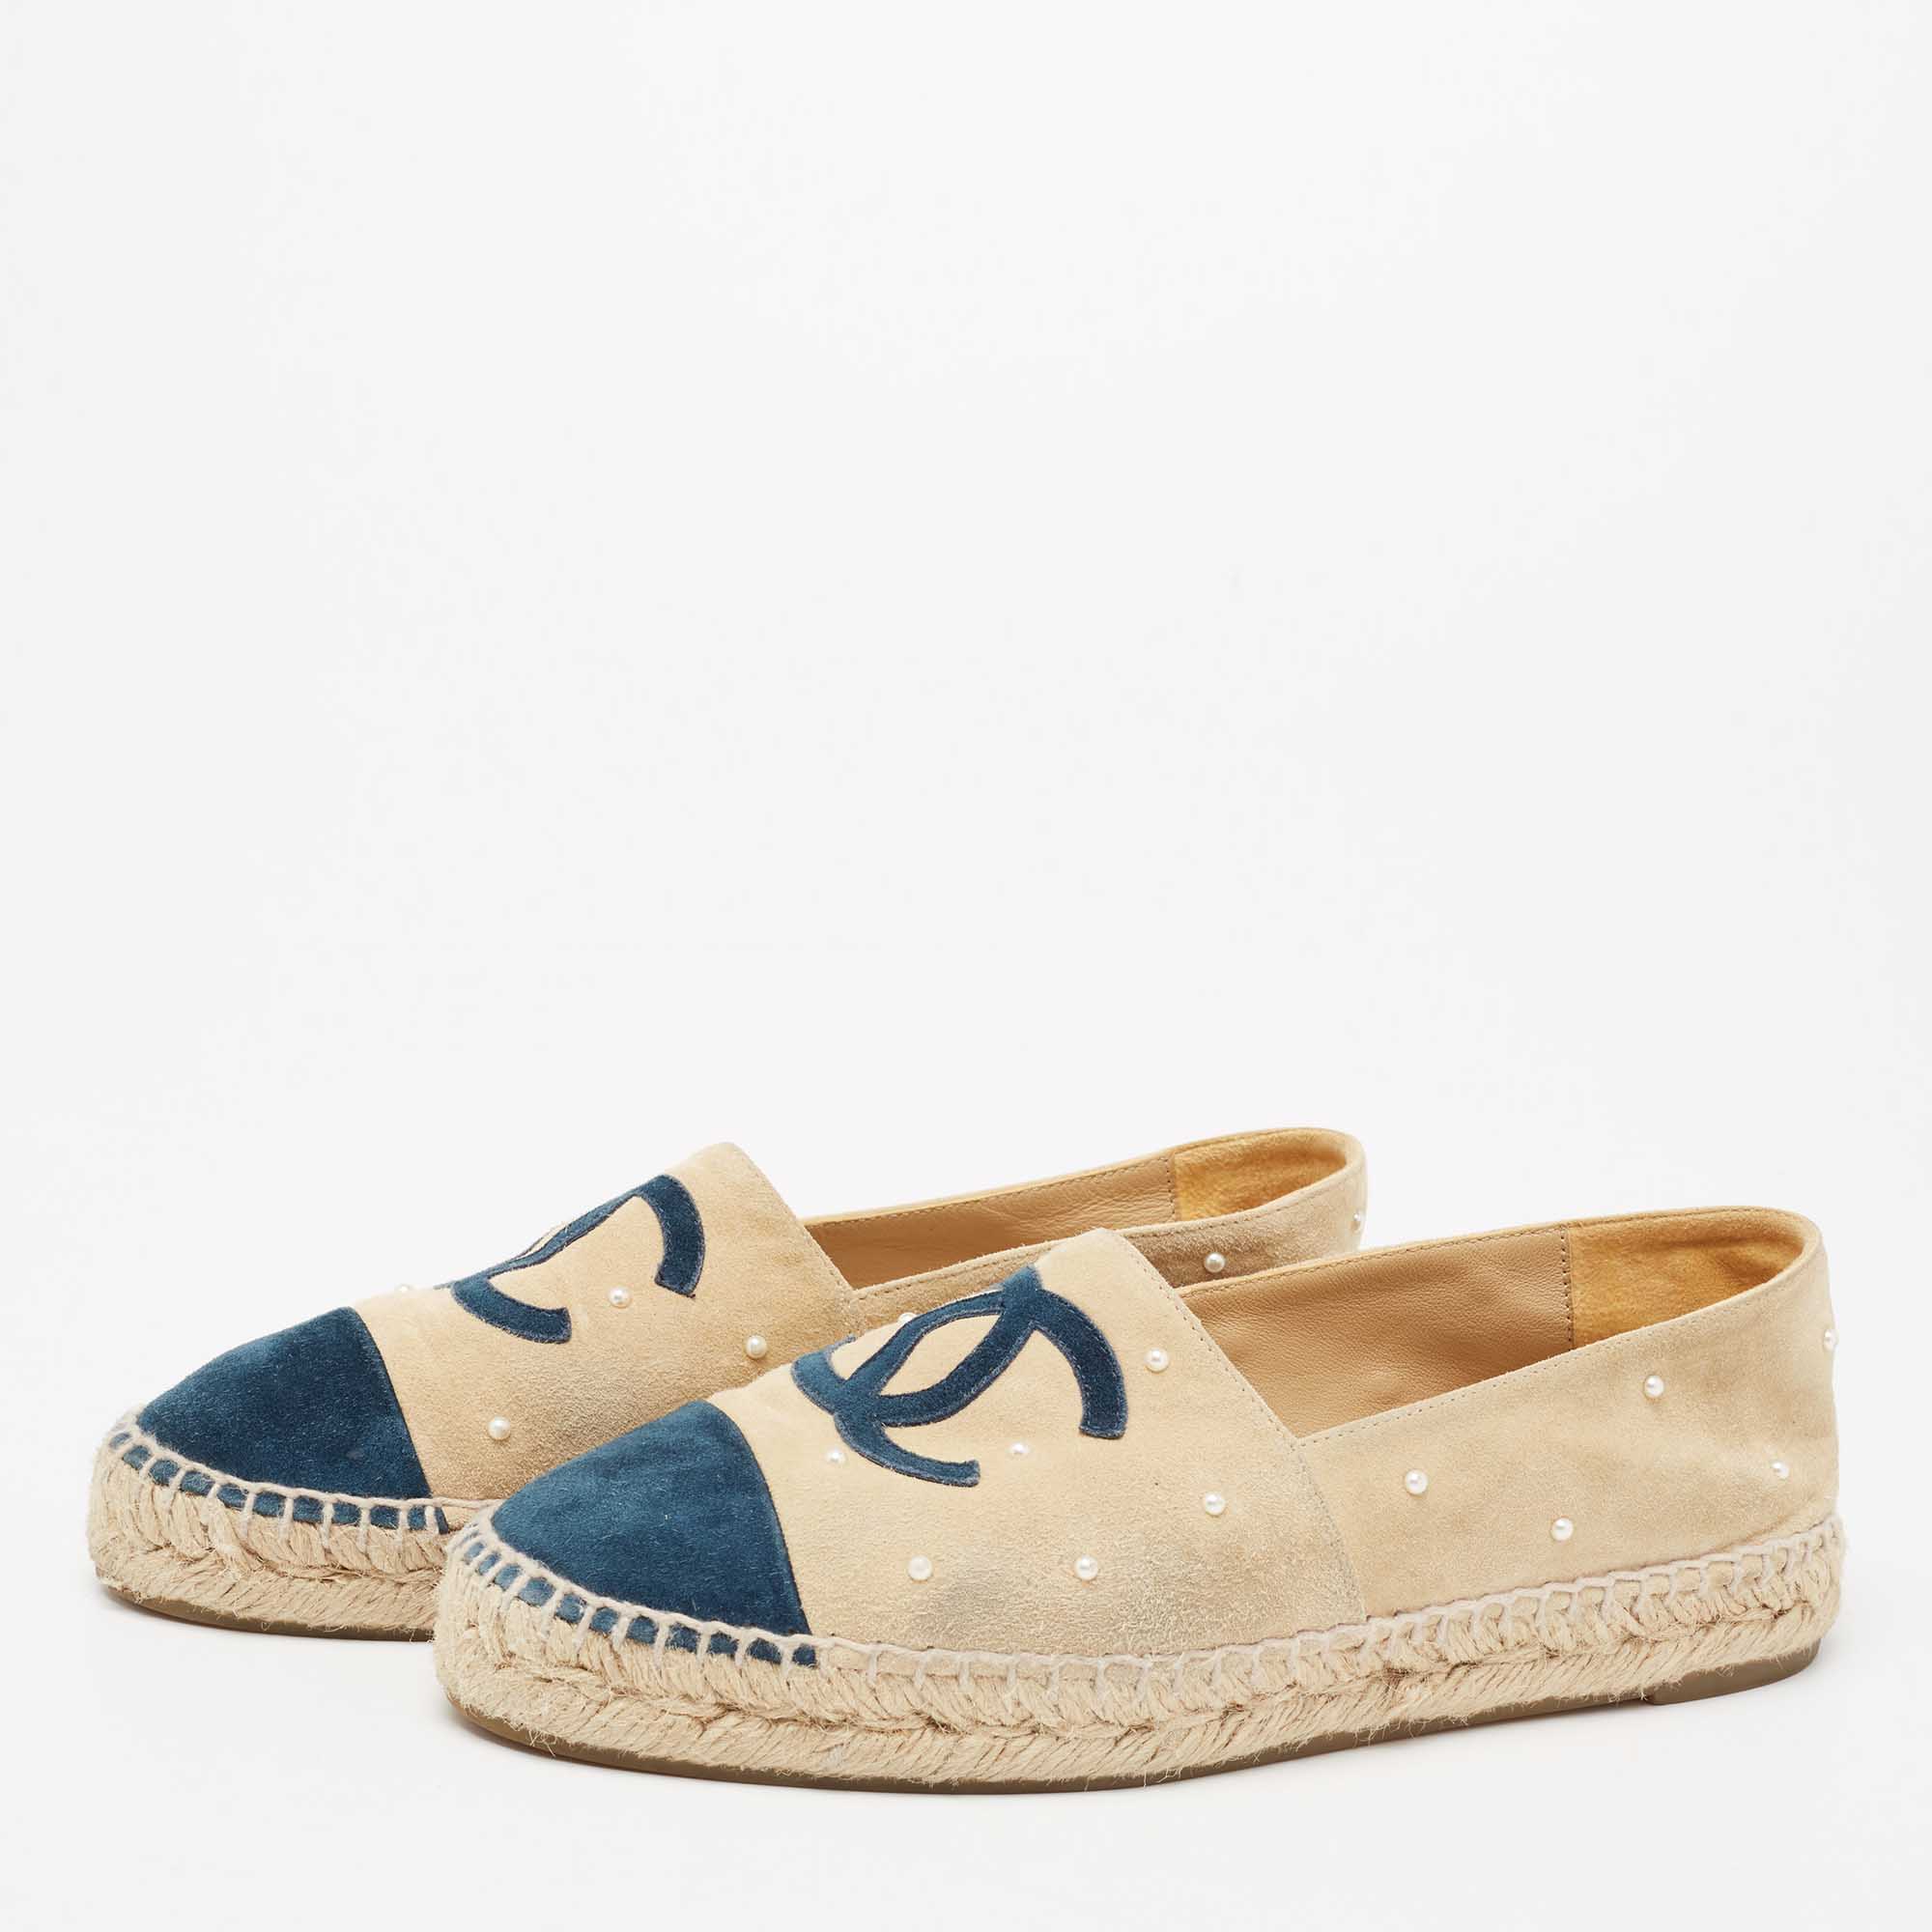 

Chanel Beige/Navy Blue Faux Pearl Embellished Suede Cap-Toe CC Espadrille Flats Size